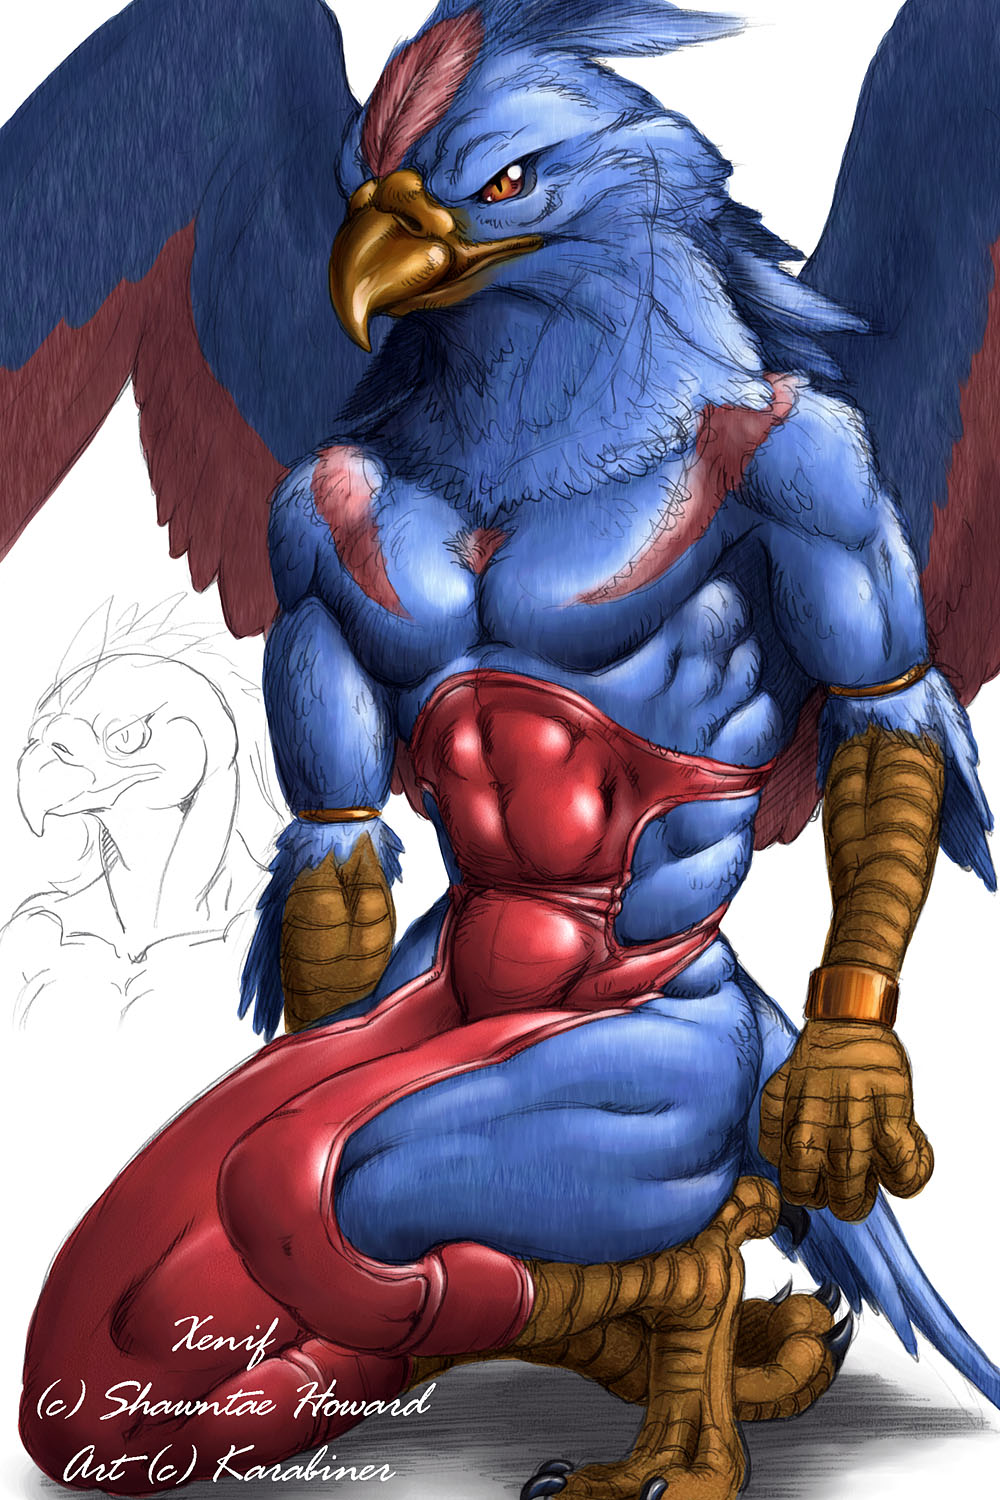 anthro avian beak bird blue blue_feathers claws crouching extinctioners feathers hindpaw karabiner kneeling male markings muscles paws plain_background red red_markings solo talons white_background wings wristband xenif_(character)